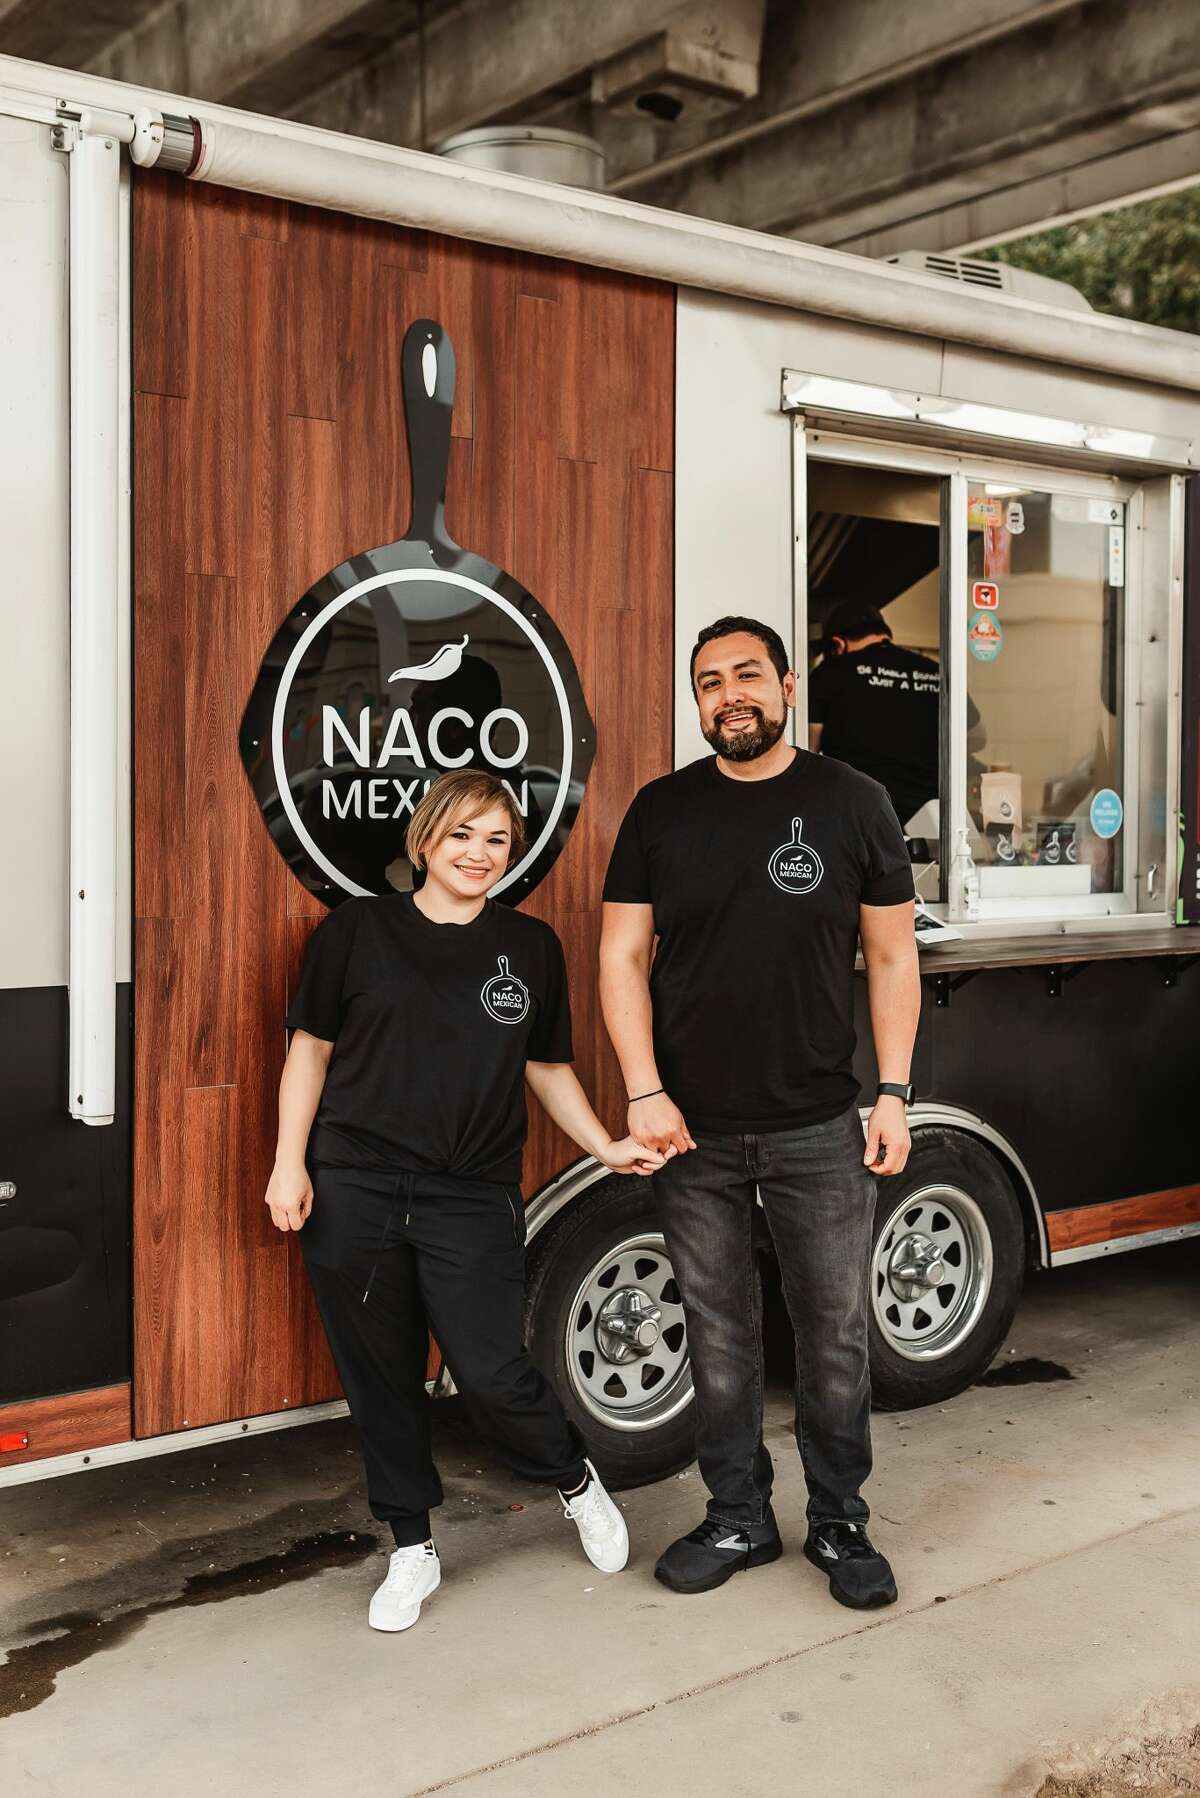 Husband and wife, Francisco Estrada and Lizzeth Martinez, founded Naco as a food truck.